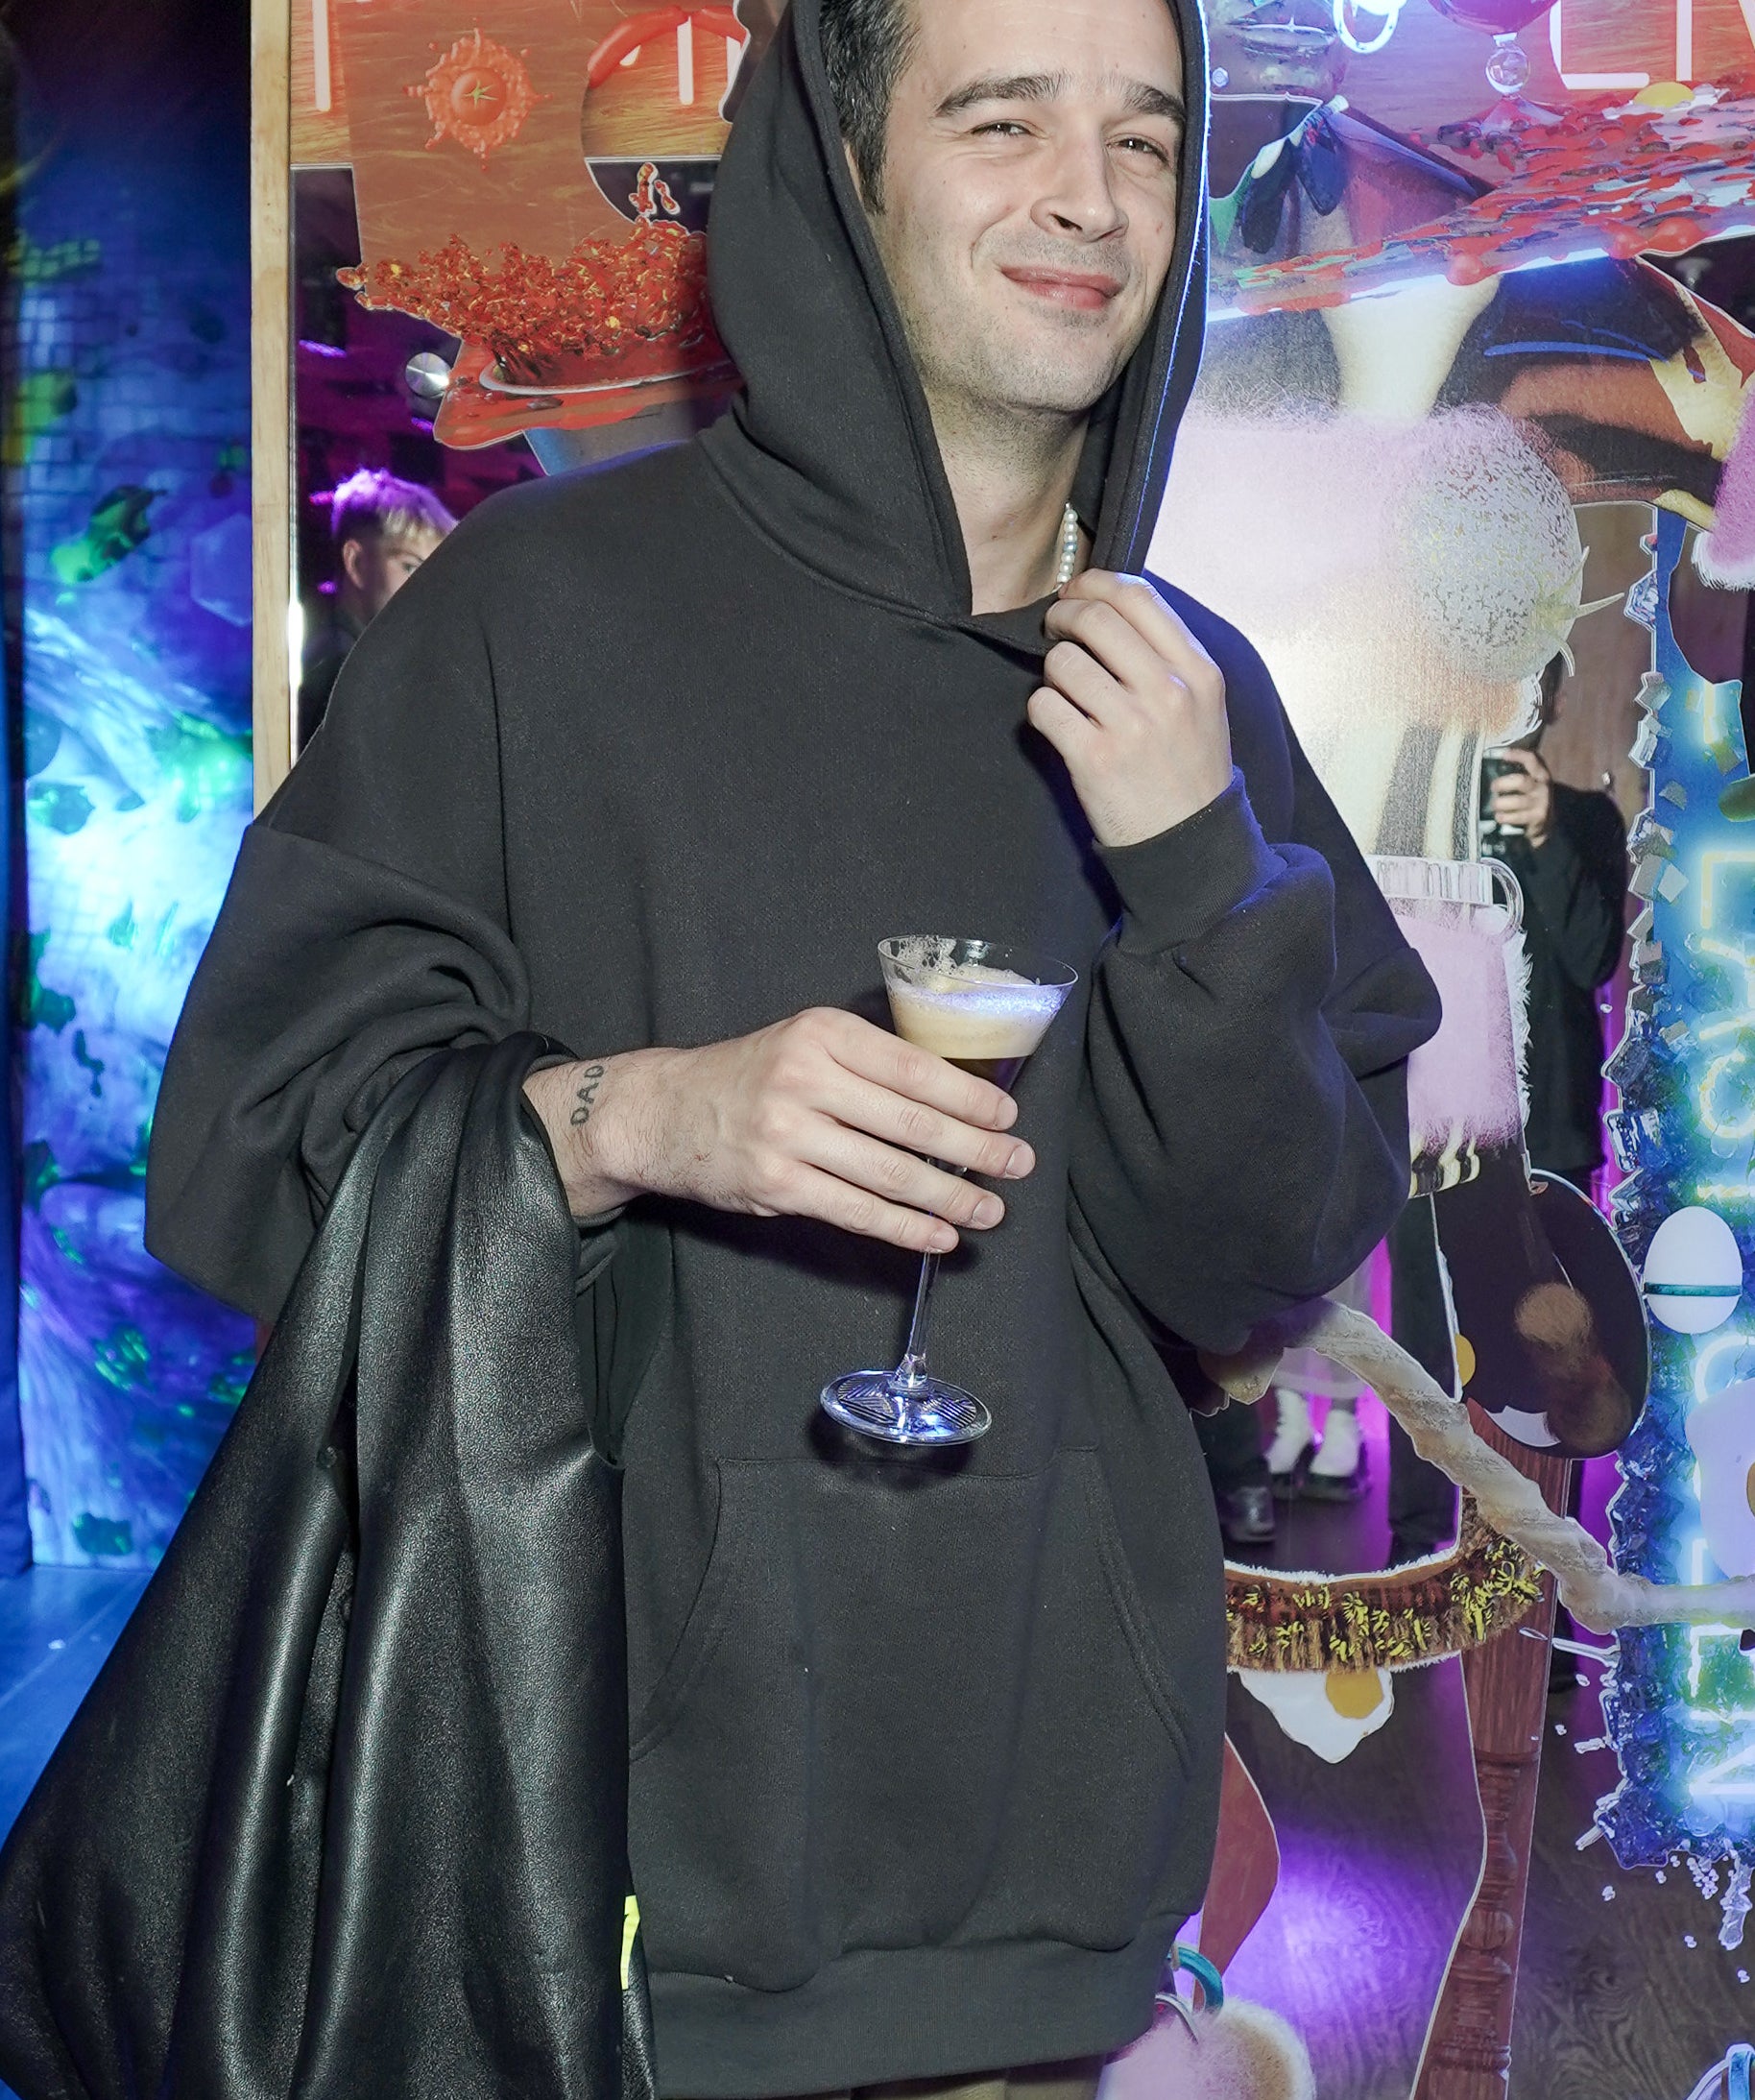 Close-up of Matty in a hoodie and holding a drink